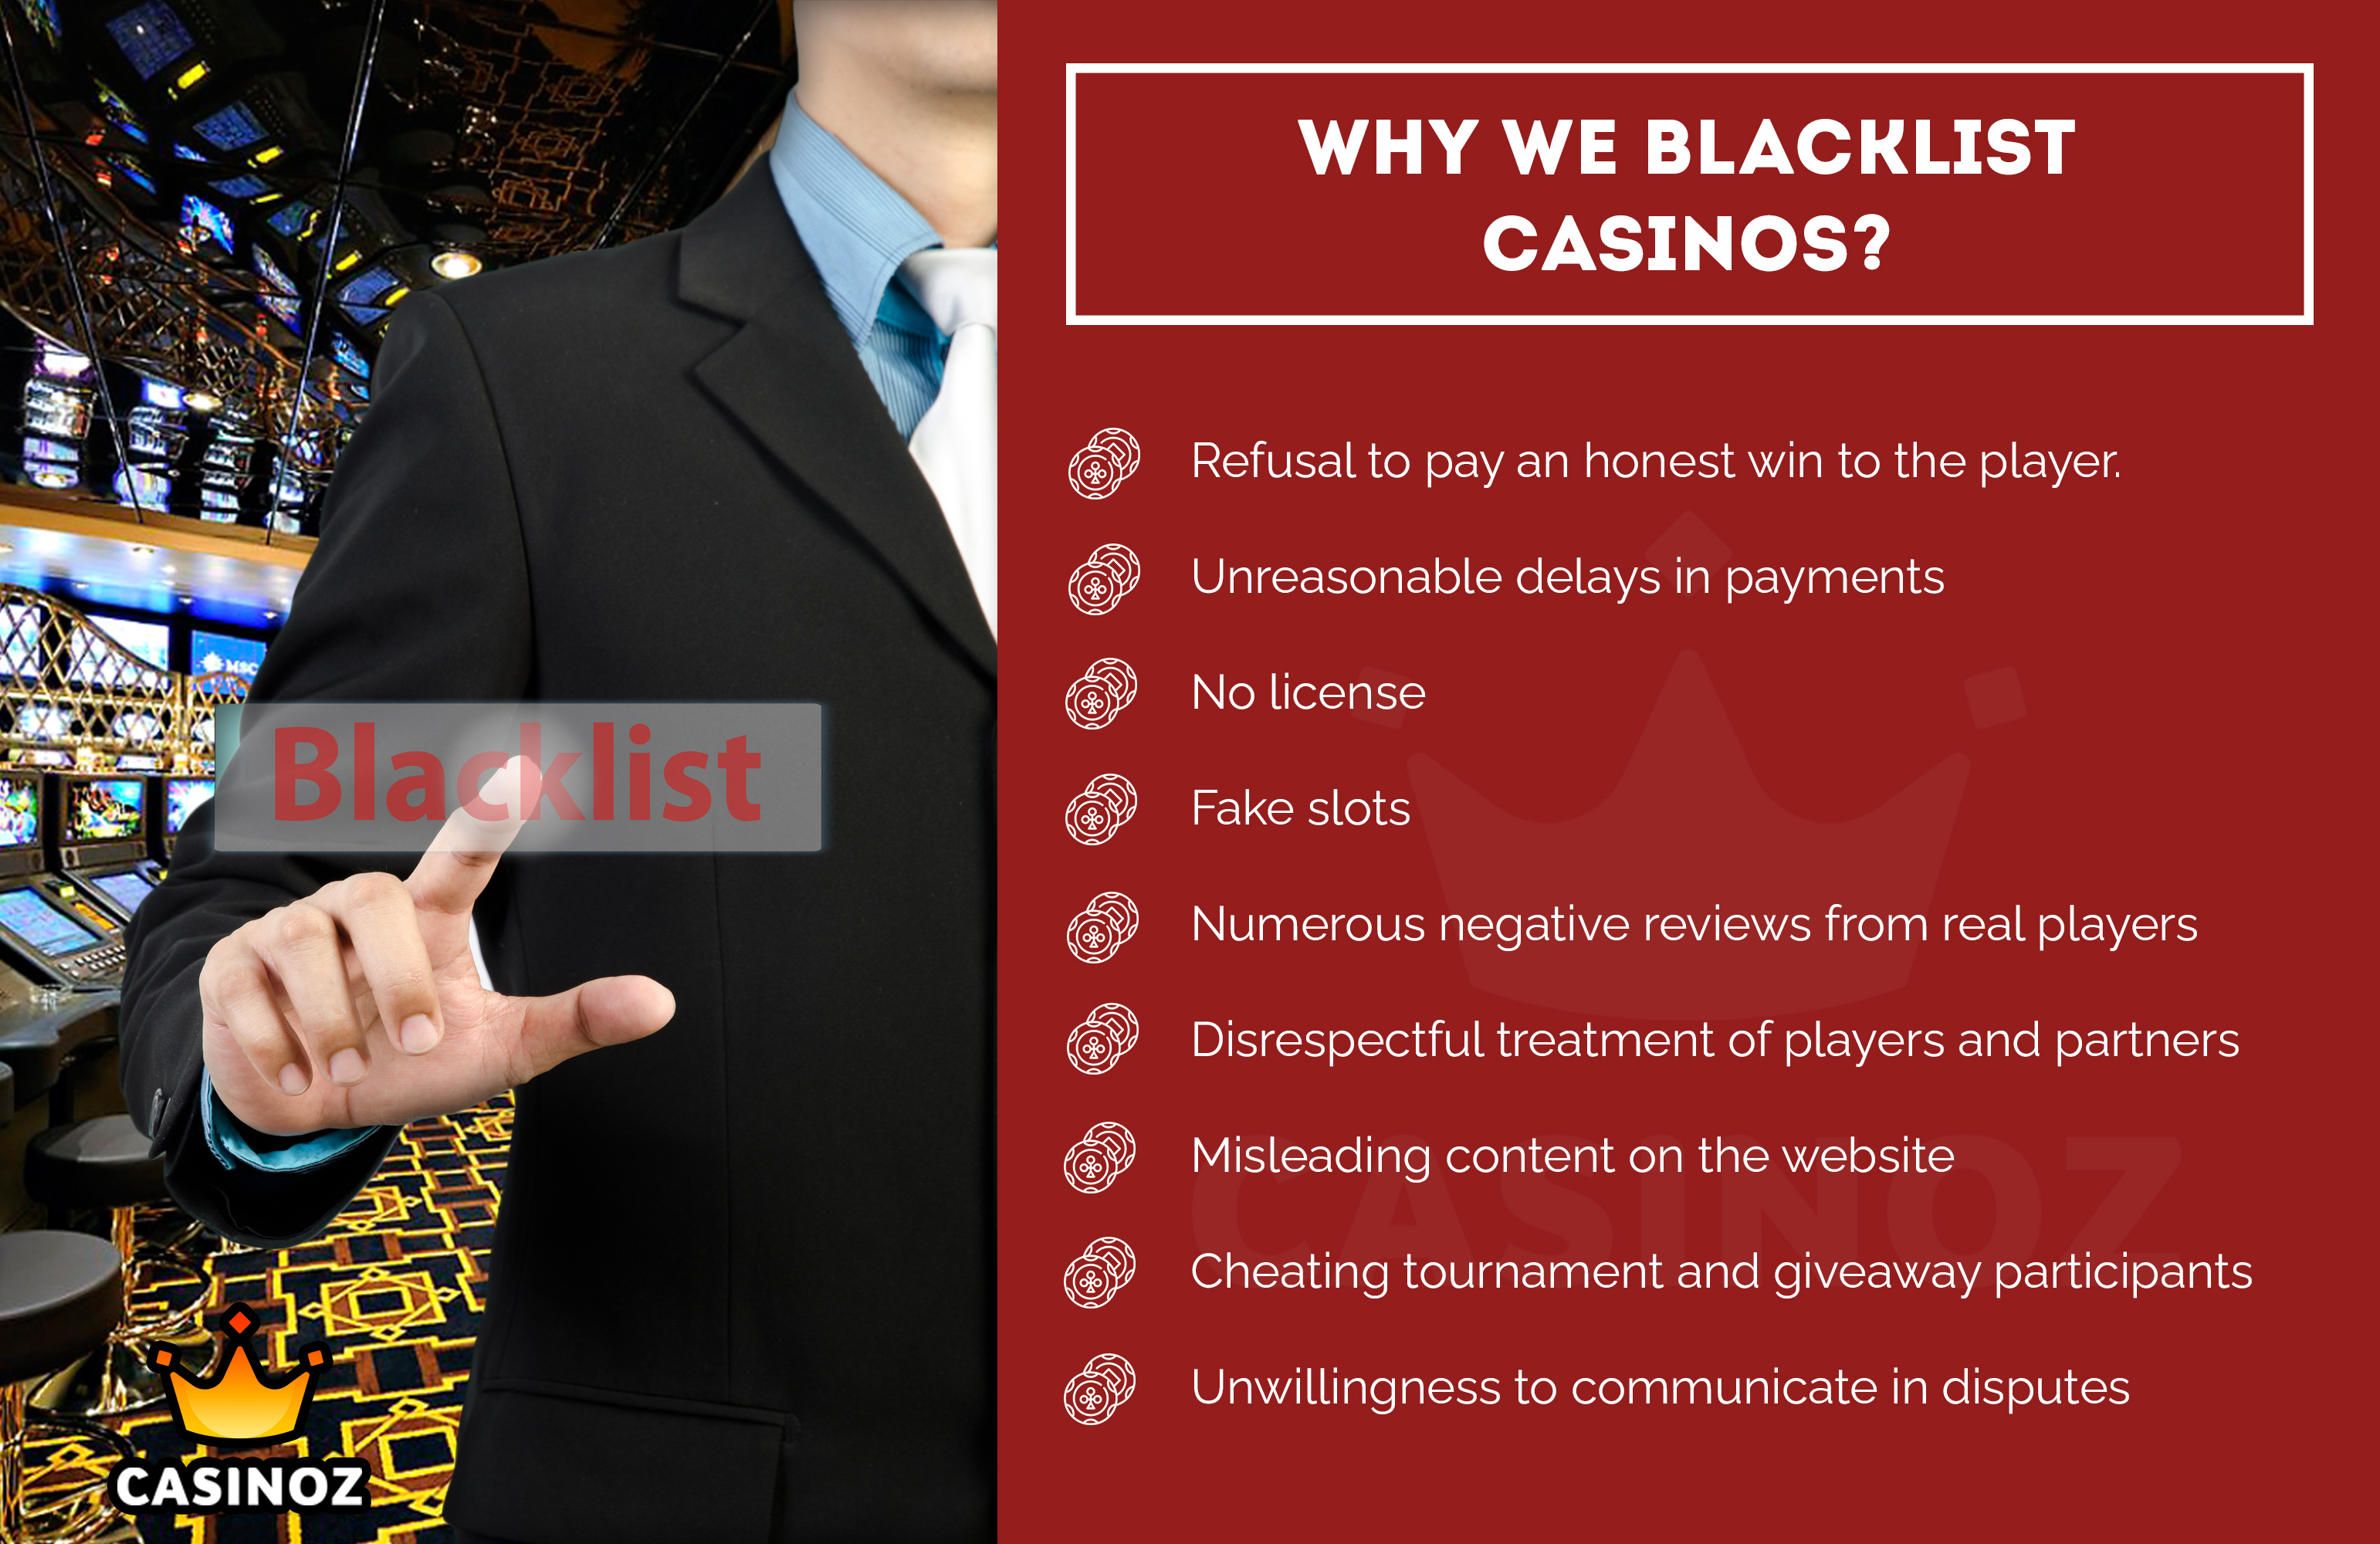 ive been blacklisted from online casino